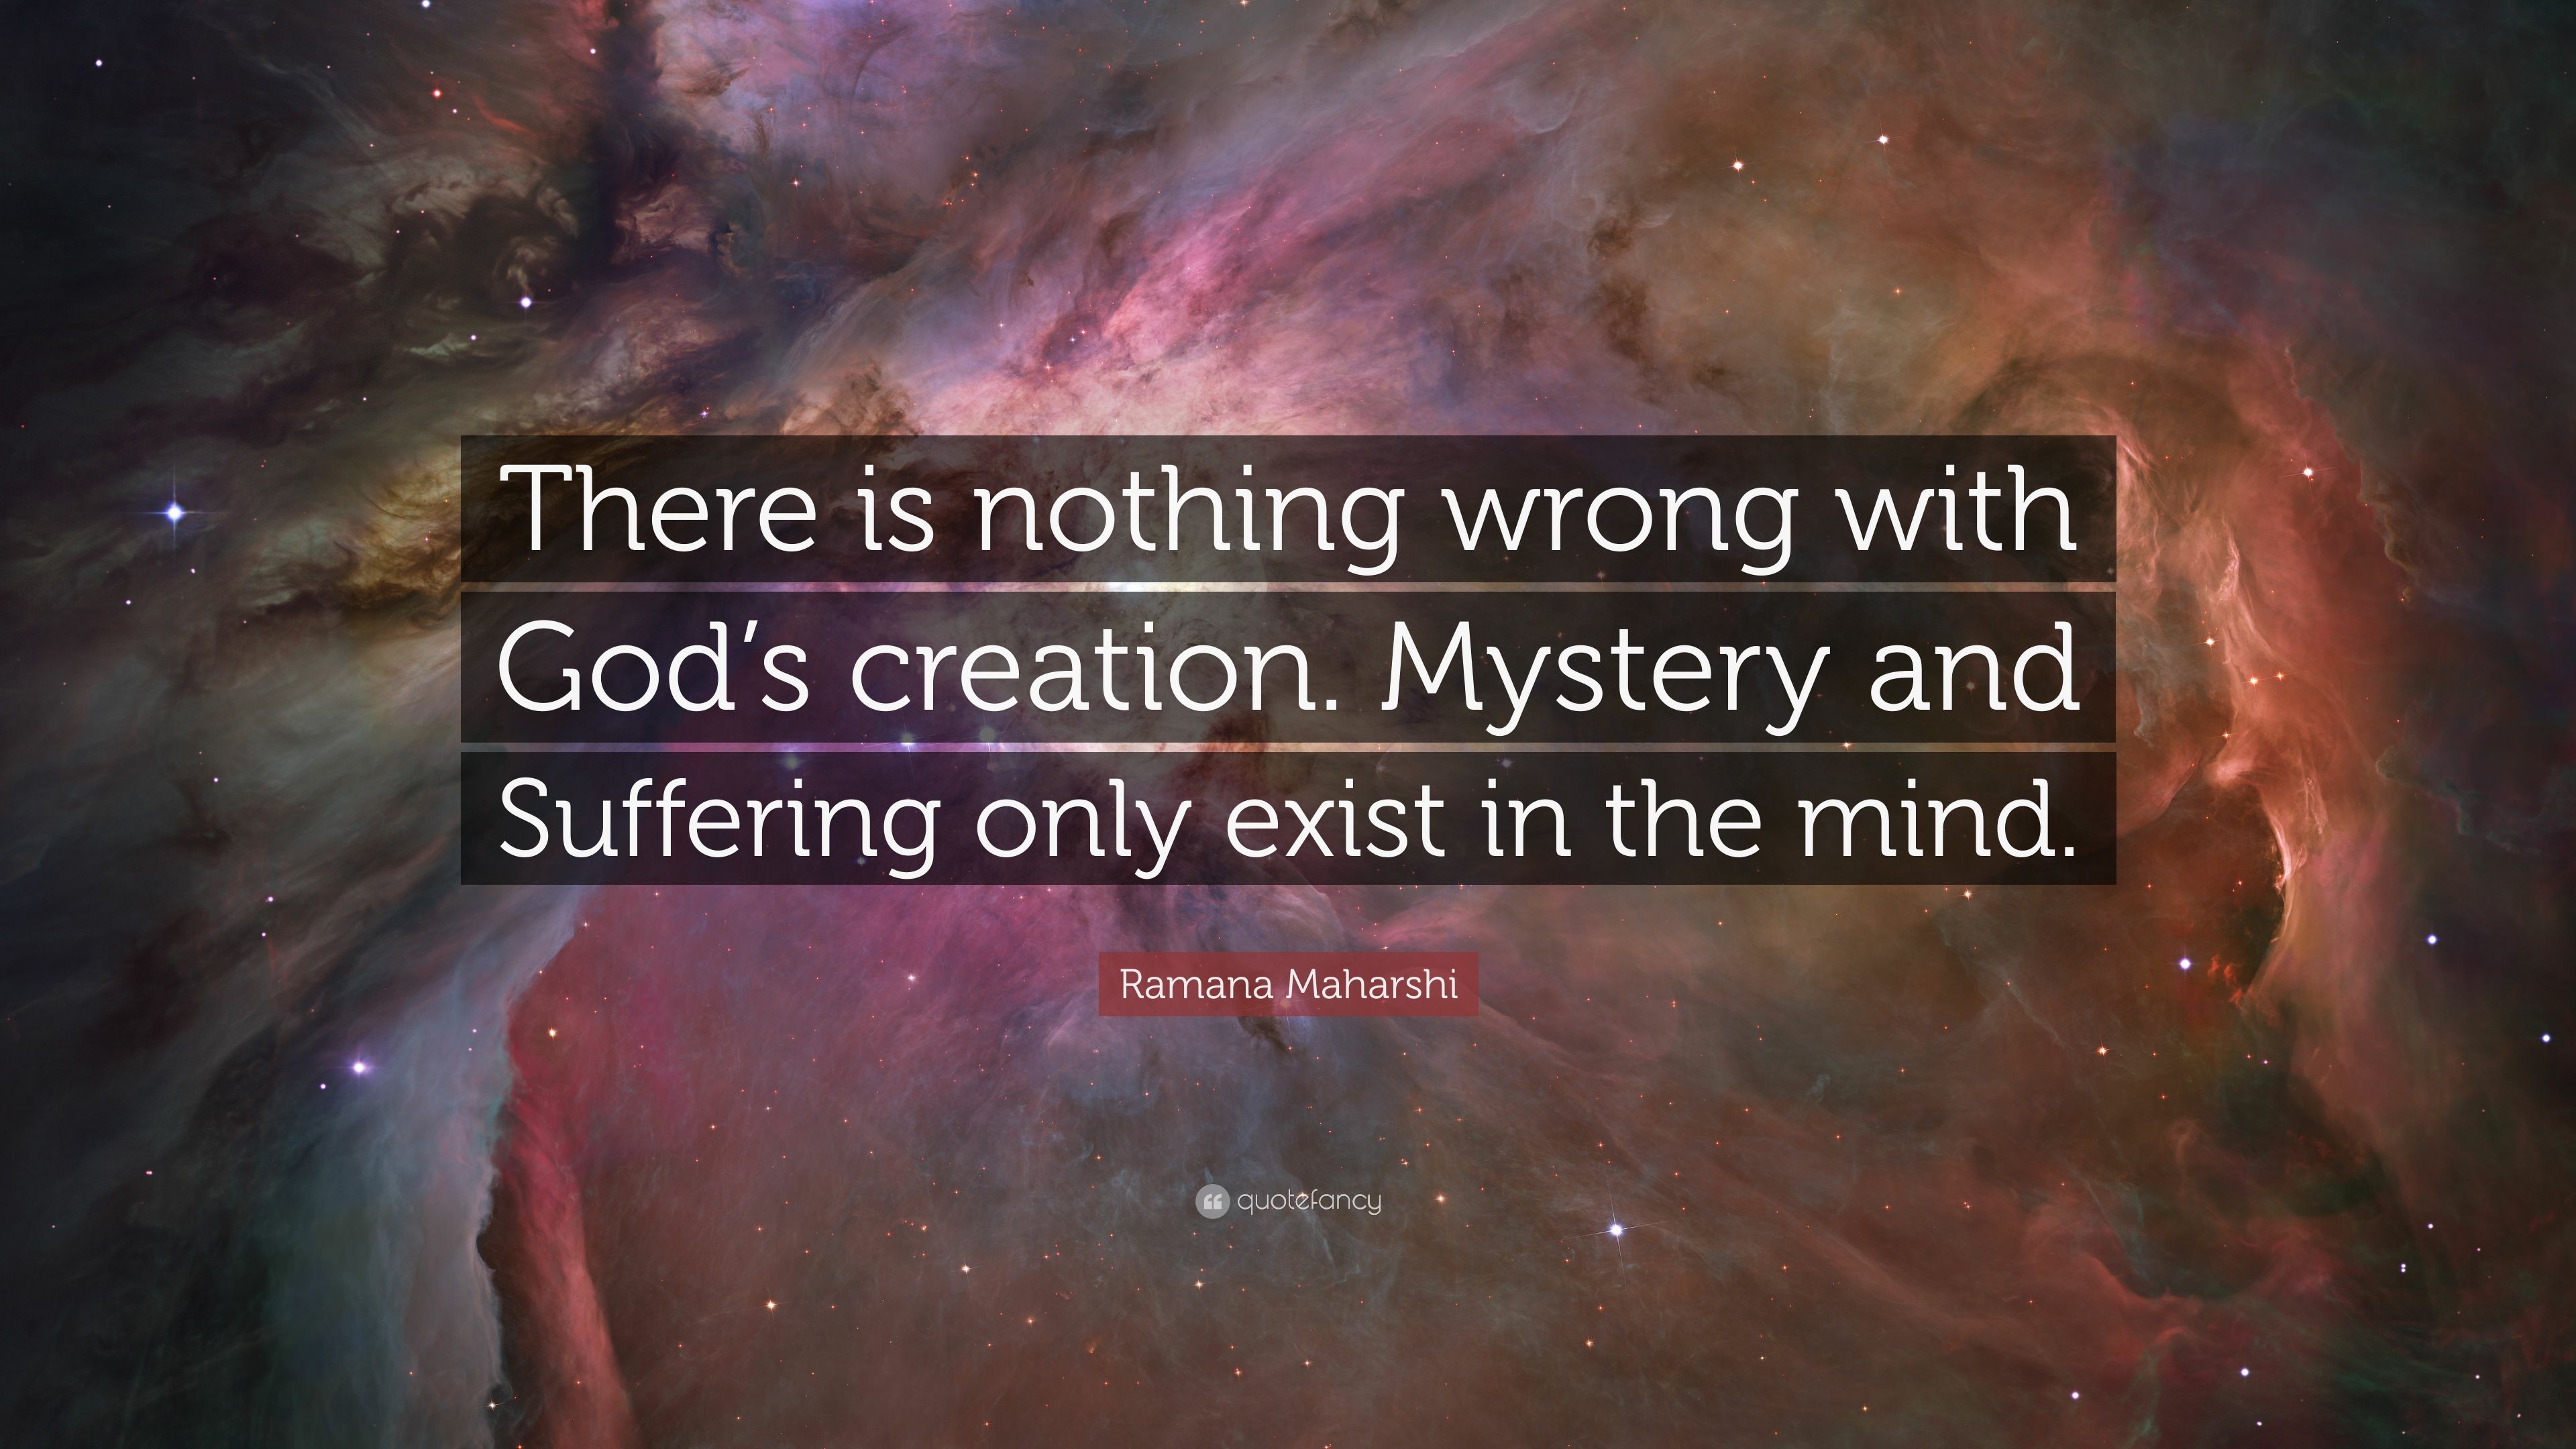 Ramana Maharshi Quote: “There is nothing wrong with God's creation